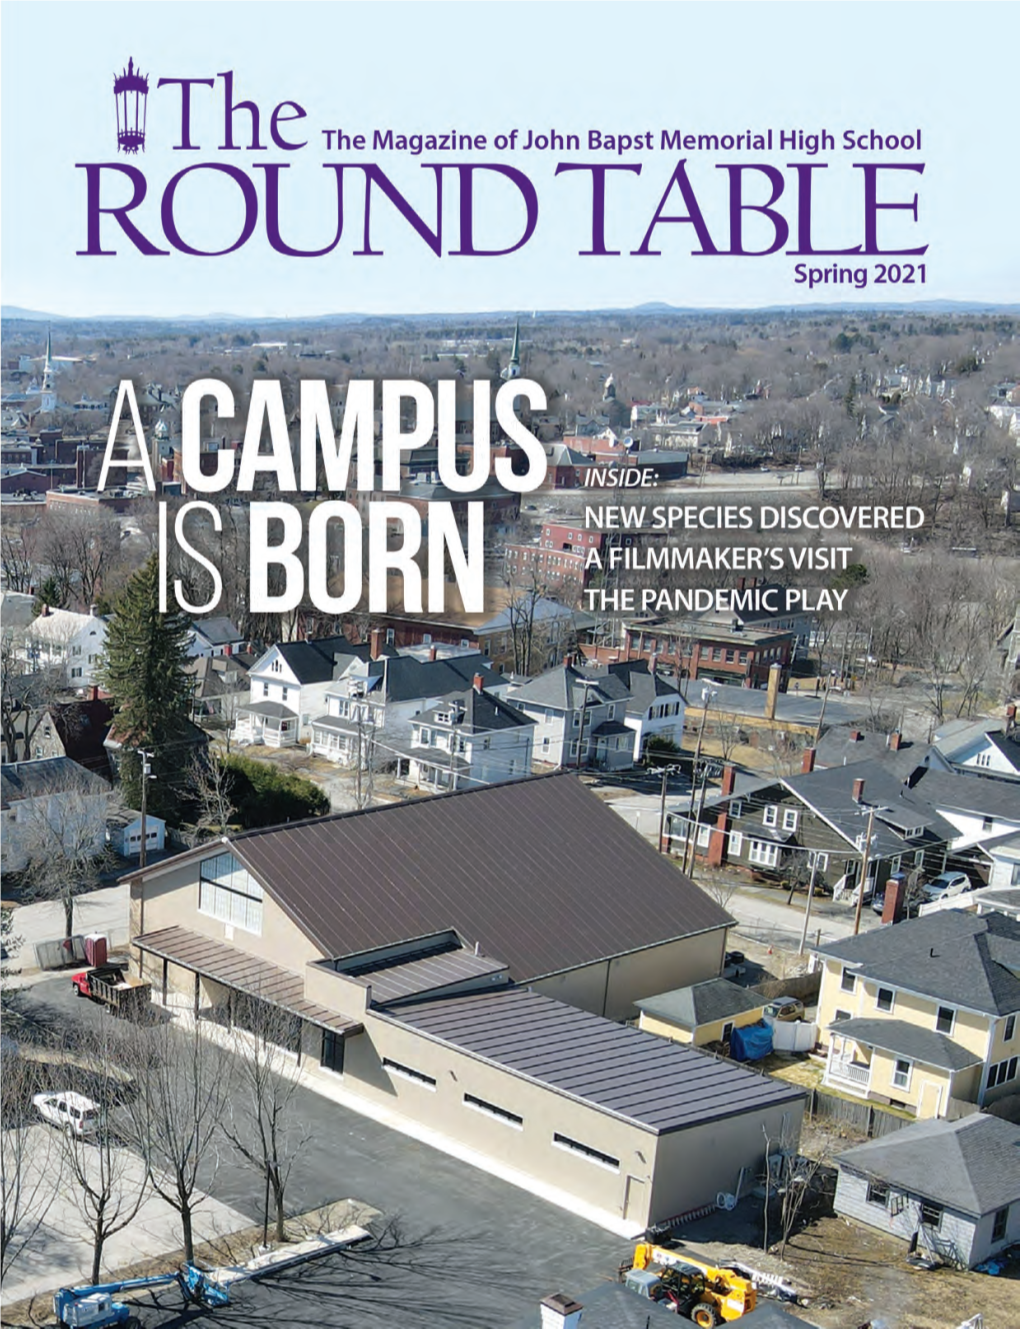 The Spring 2021 Round Table, the Magazine of John